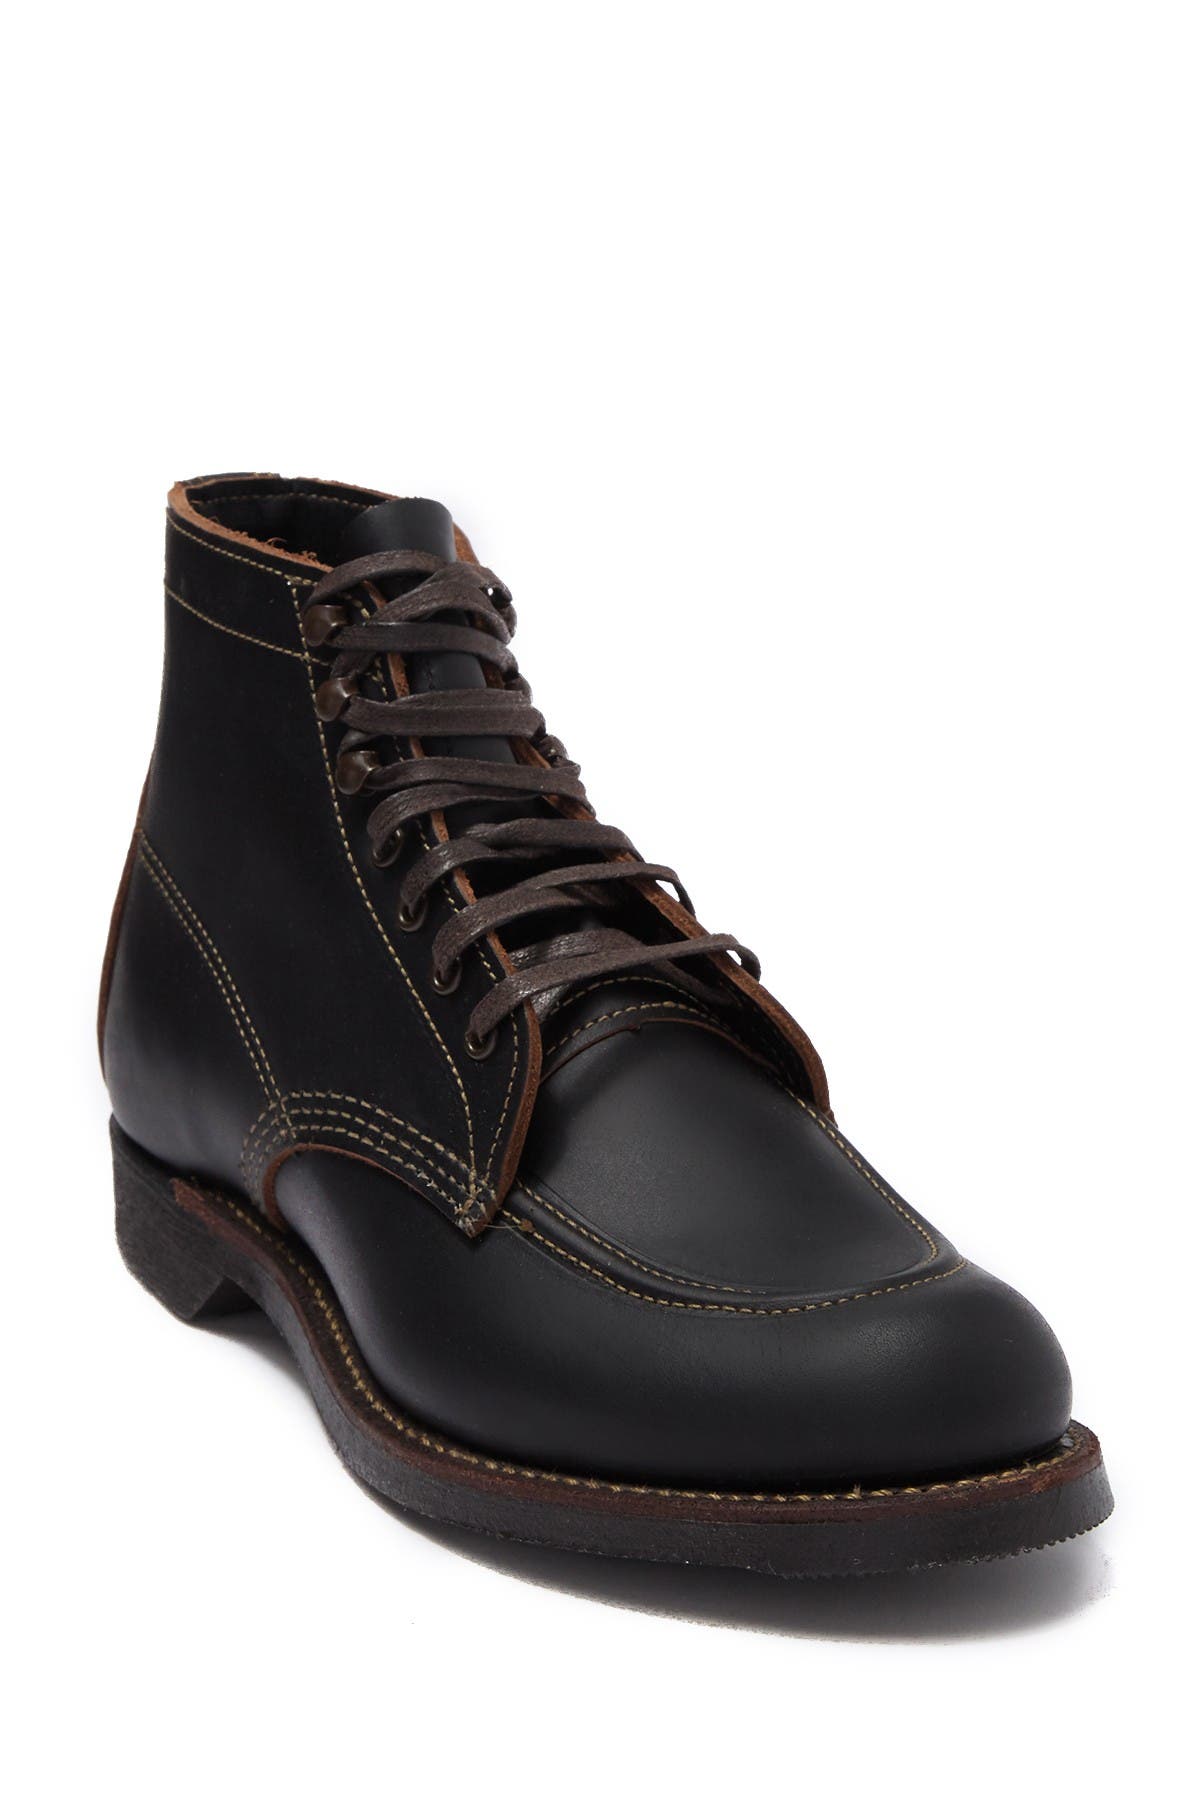 nordstrom rack red wing